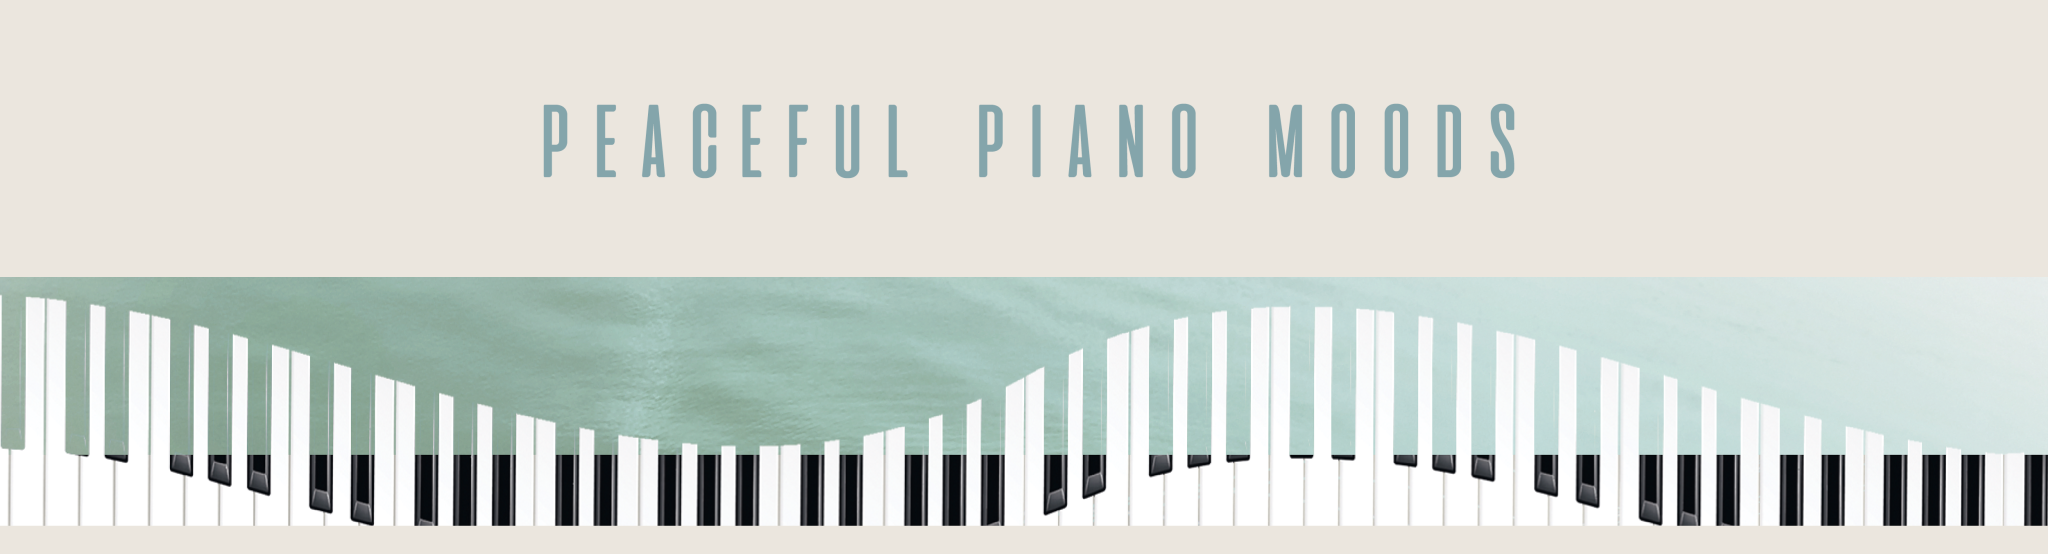 Peaceful Piano Moods - Story Banner